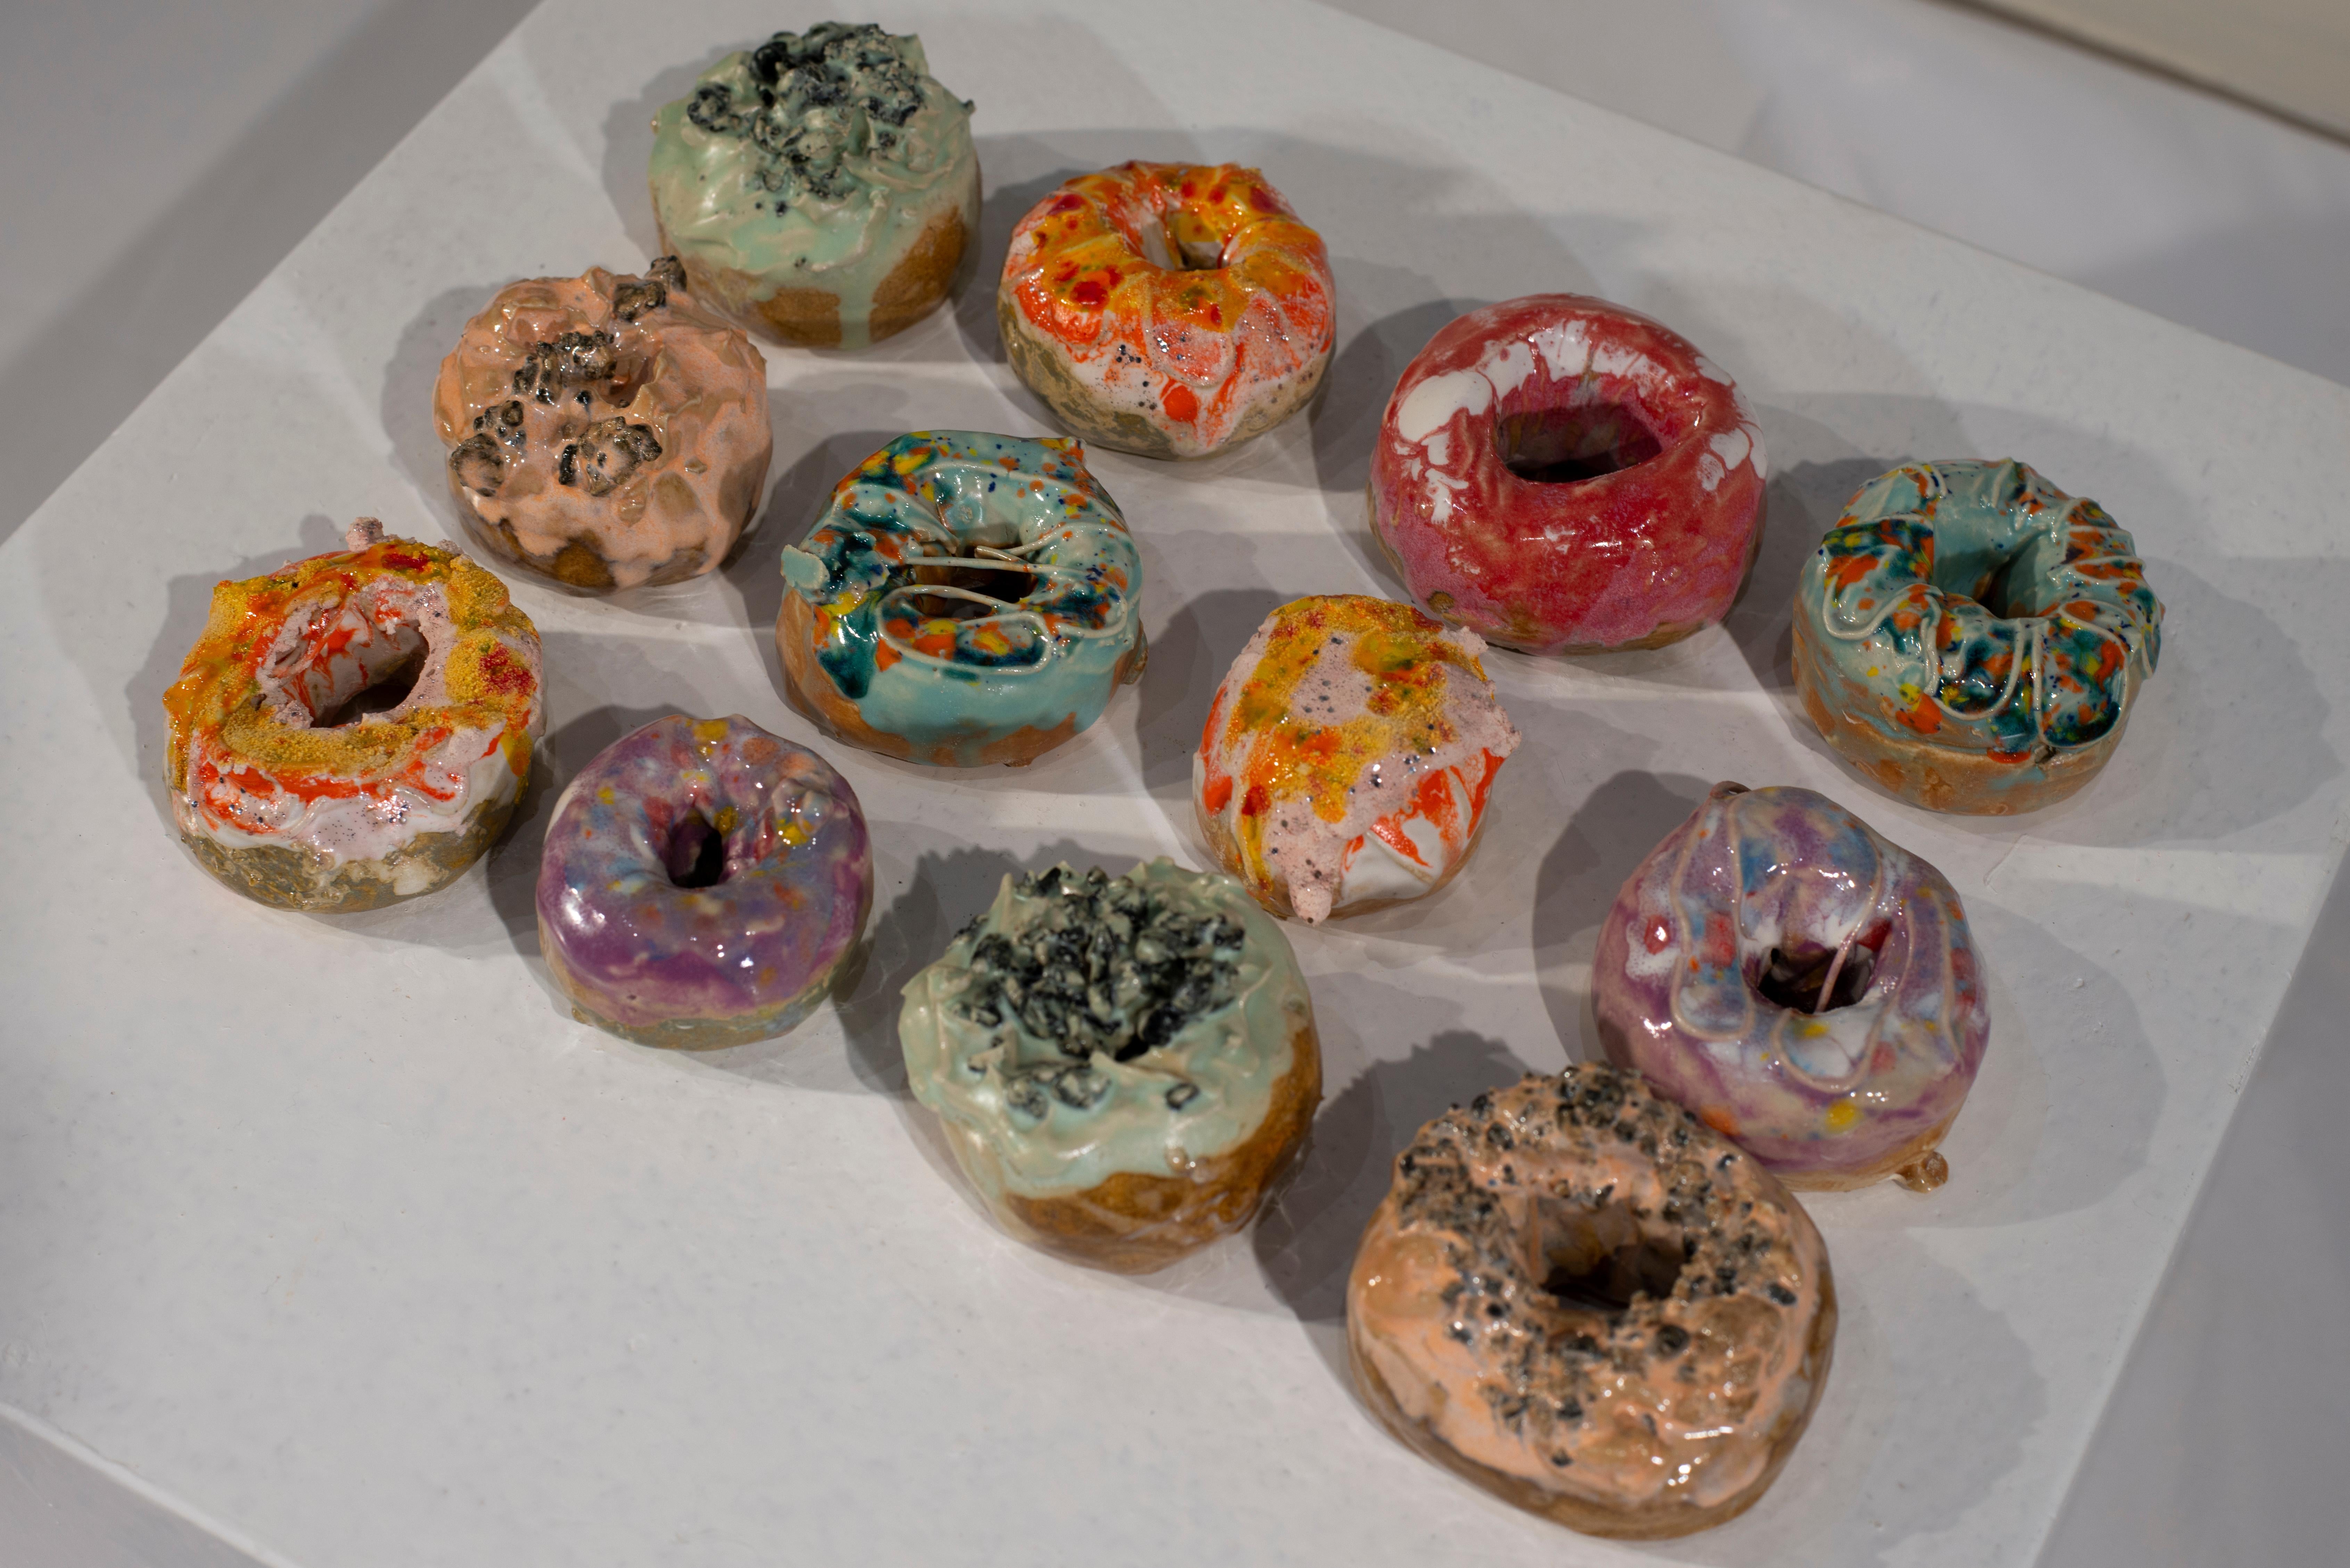 Multiple of 12, 6 currently available: Red & white; Pink, yellow, red, with swirl; Light blue & rainbow, with swirl & triangular hole; Small purple; Peach colored, line of toppings; Seafoam green, blue toppings. $125 per piece.

JENNY DAY earned an